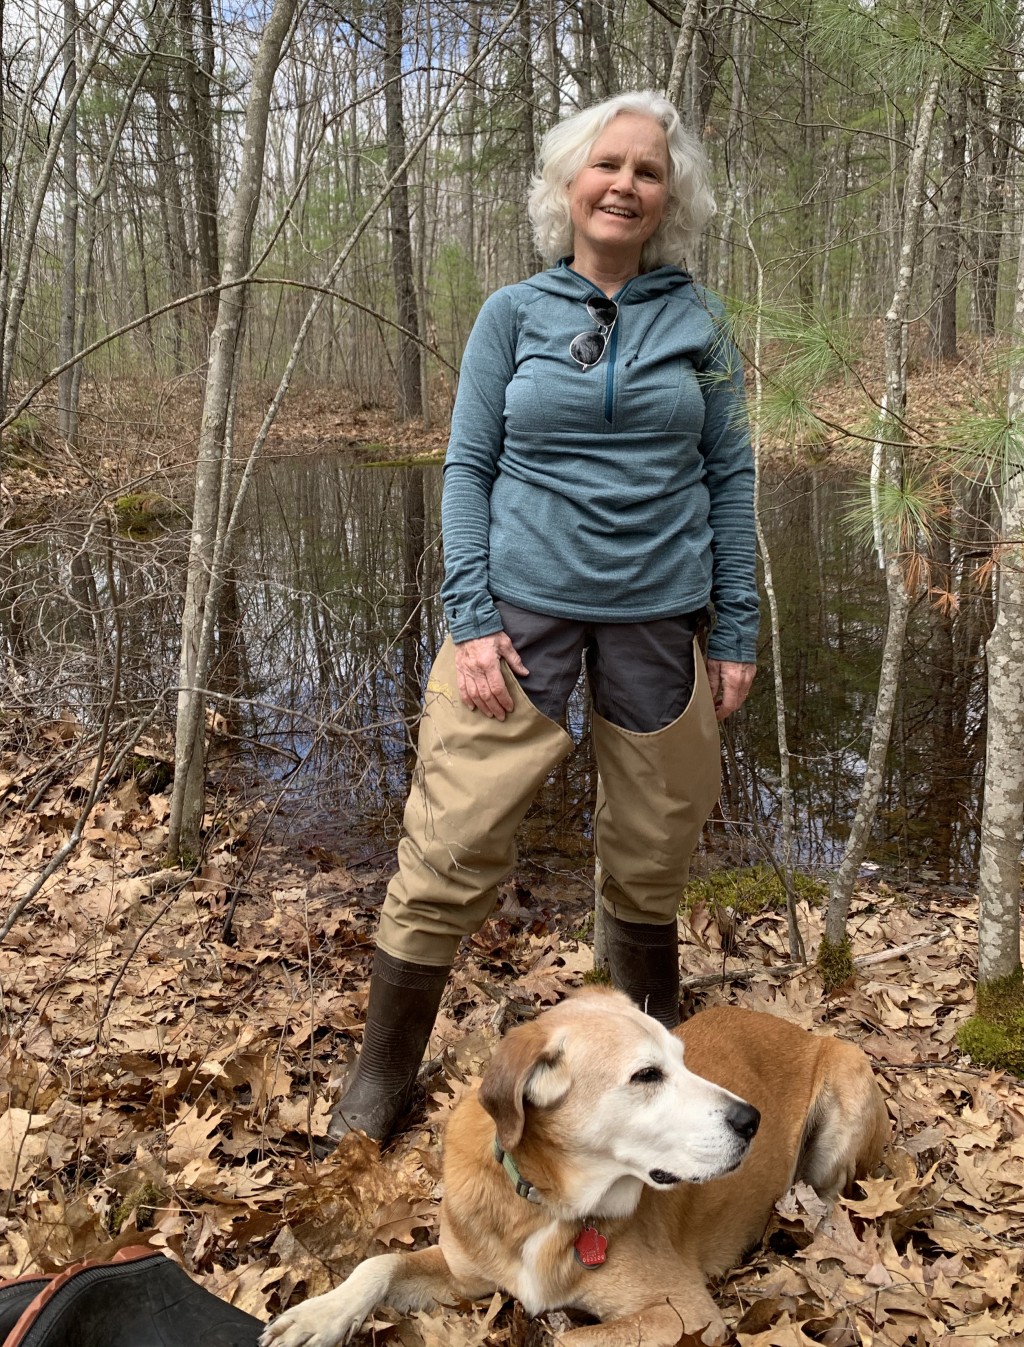 Pam Morgan stands with dog in woods